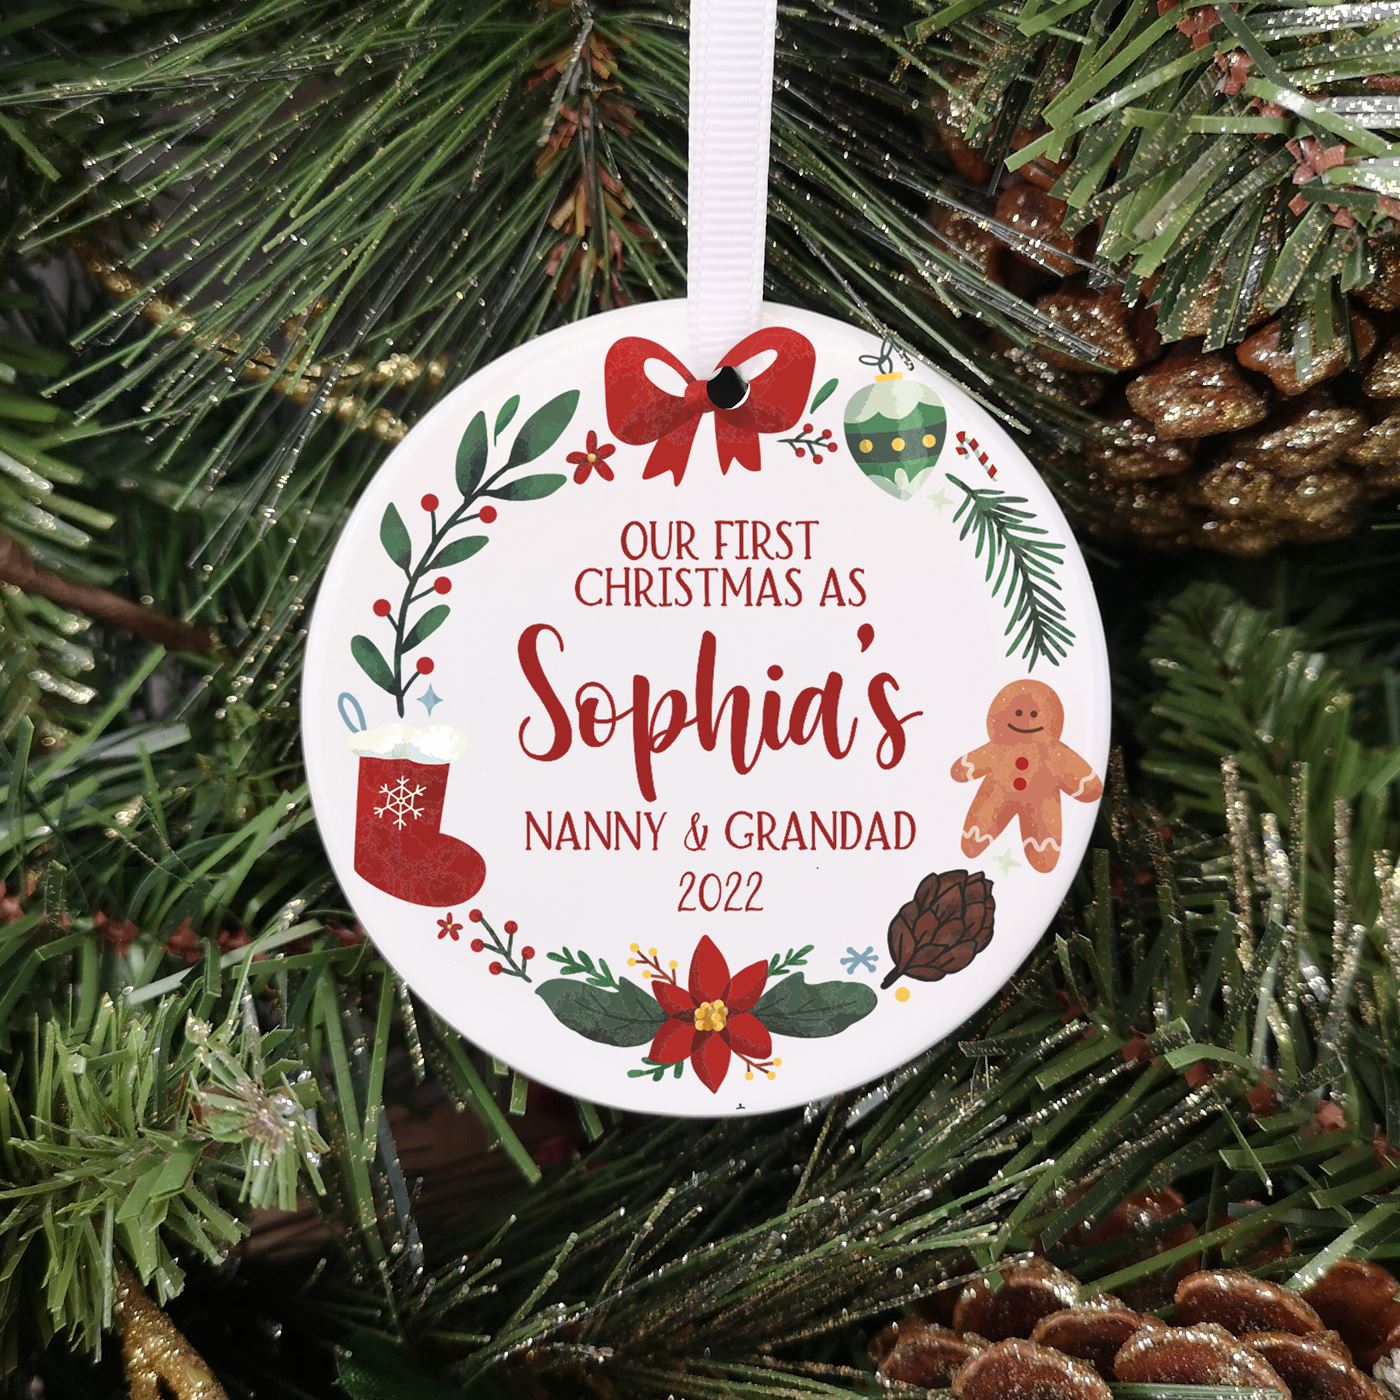 Personalised Ceramic 'Our First Christmas as Grandparents' Bauble - Wreath